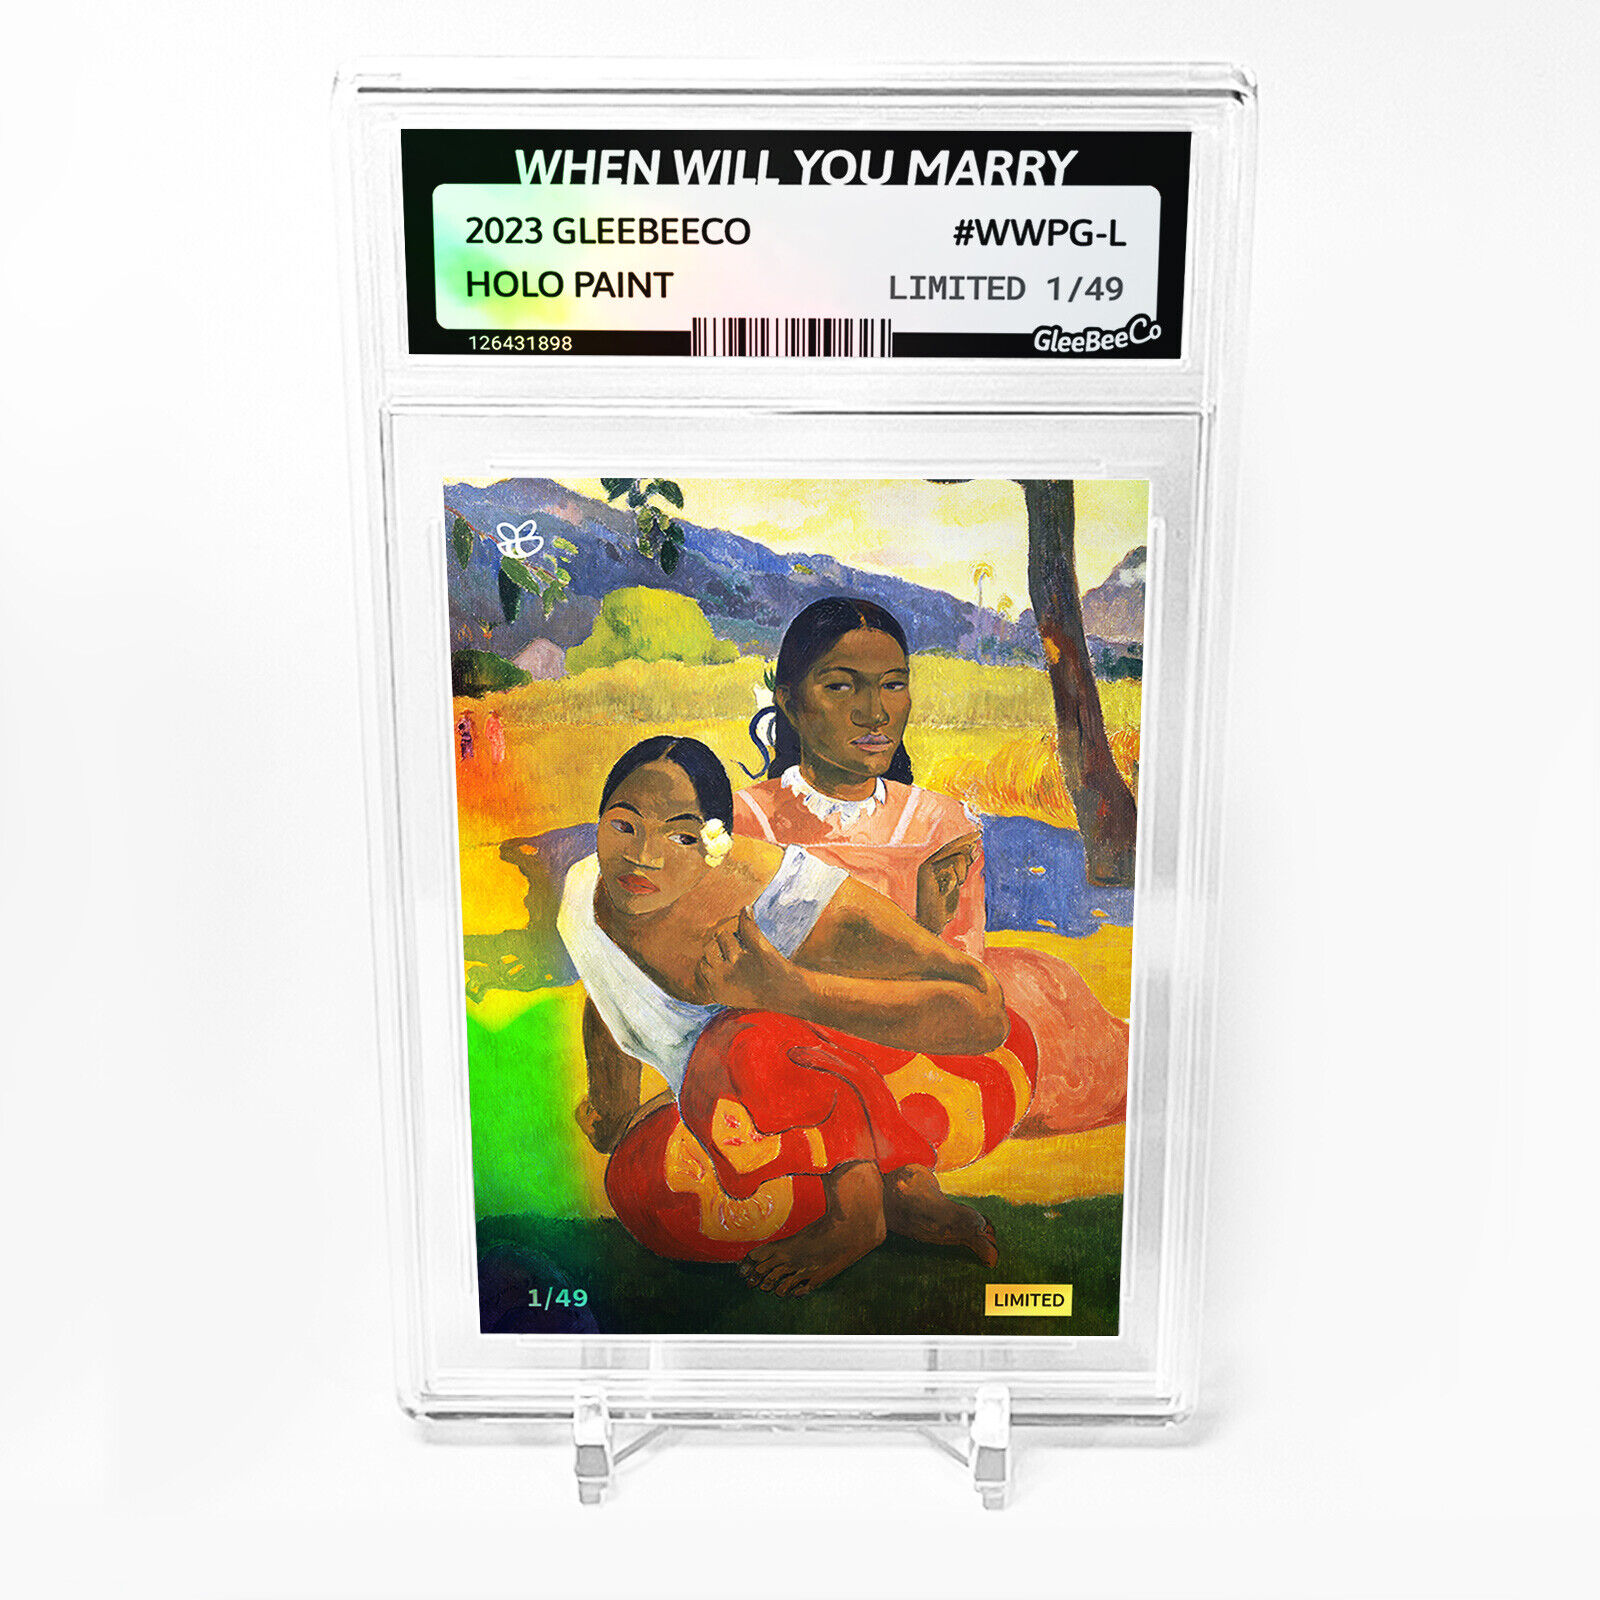 WHEN WILL YOU MARRY Holographic Card GleeBeeCo #WWPG-L LIMITED to /49 - Wow